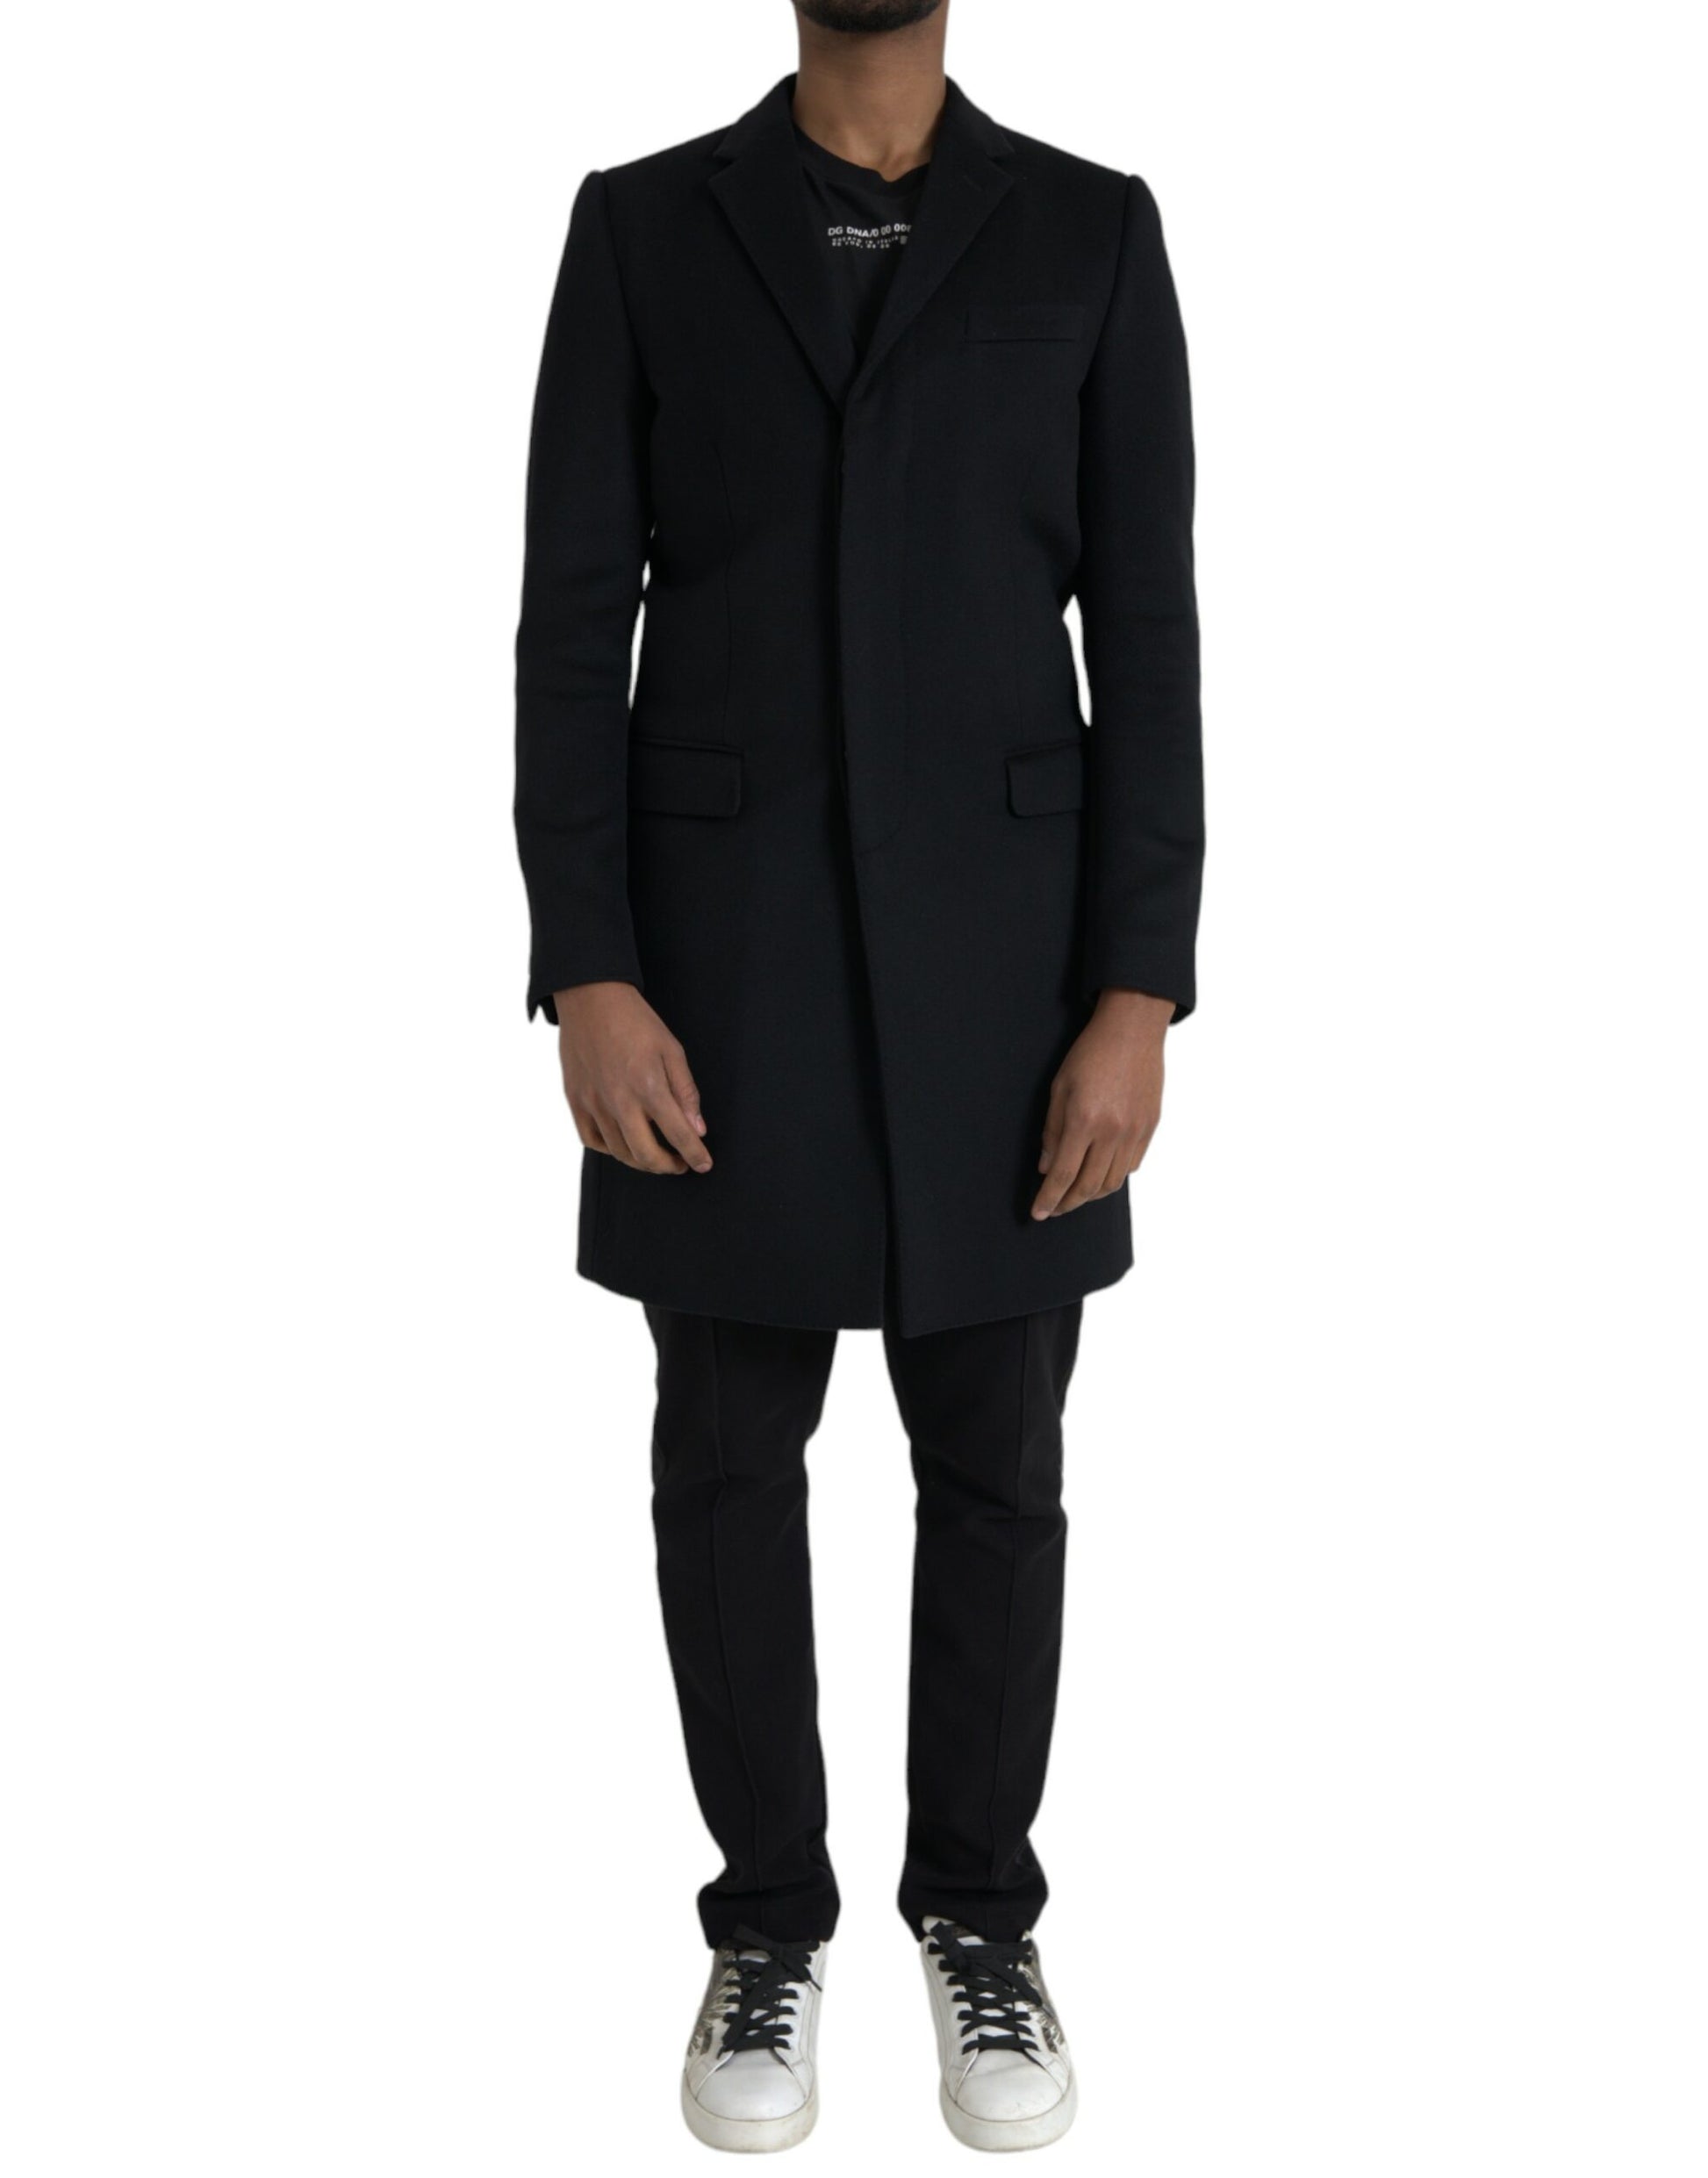 Dolce & Gabbana Black Single Breasted Trench Coat Jacket - Gio Beverly Hills